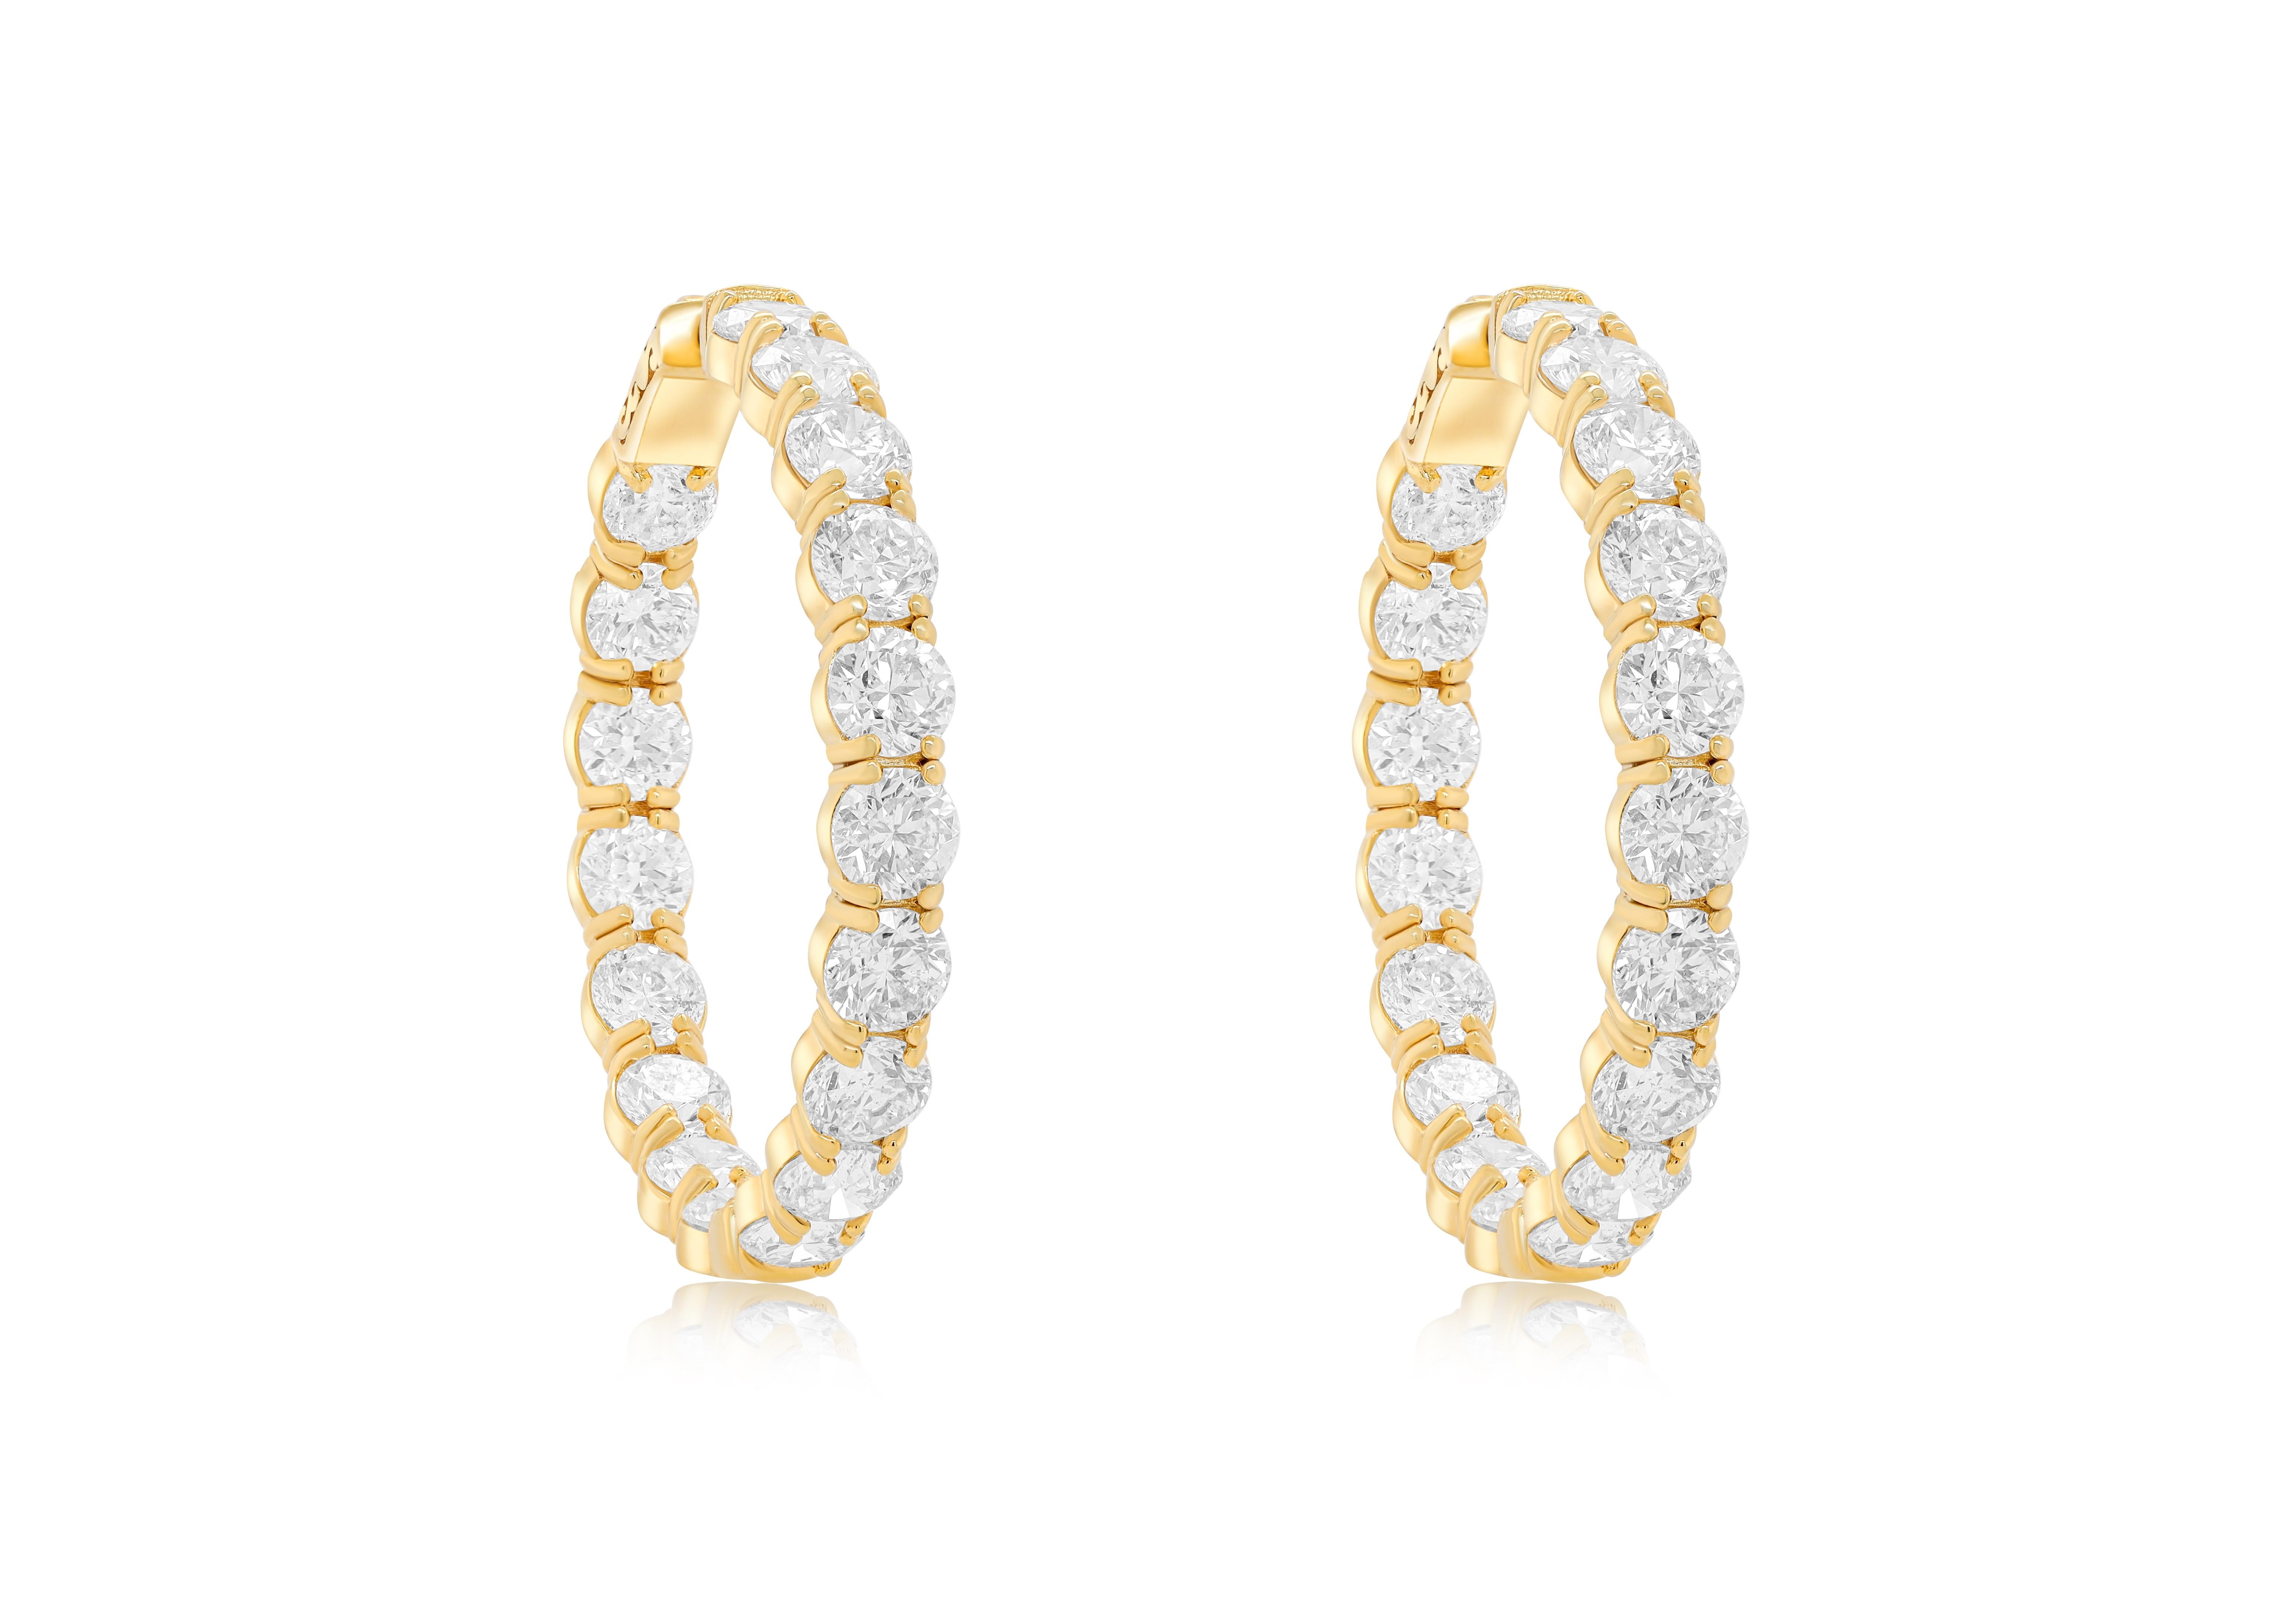 18 kt yellow gold inside-out hoop earrings adorned with 19.05 cts tw of round diamonds 36 stones)
Diana M. is a leading supplier of top-quality fine jewelry for over 35 years.
Diana M is one-stop shop for all your jewelry shopping, carrying line of